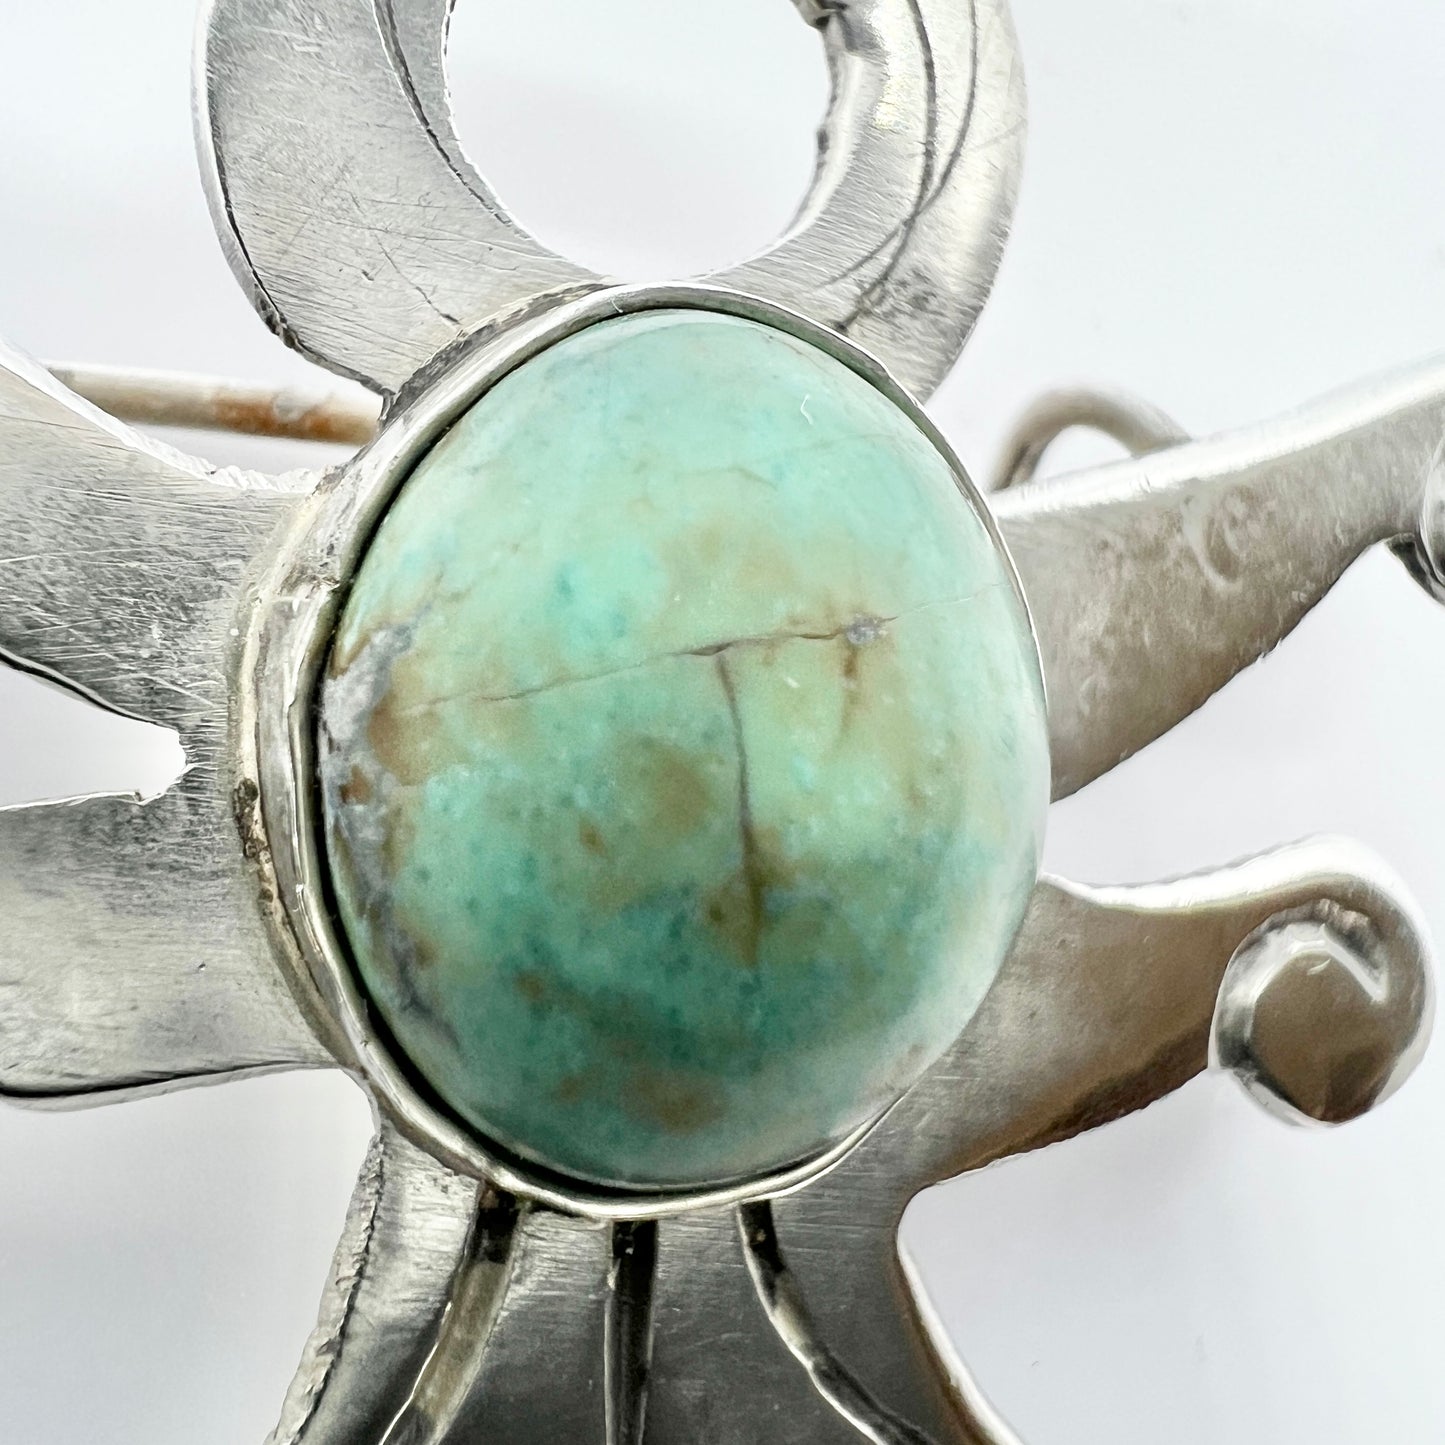 Taxco, Mexico. Vintage 1940s Sterling 980 Silver Turquoise Brooch. Maker's Mark.